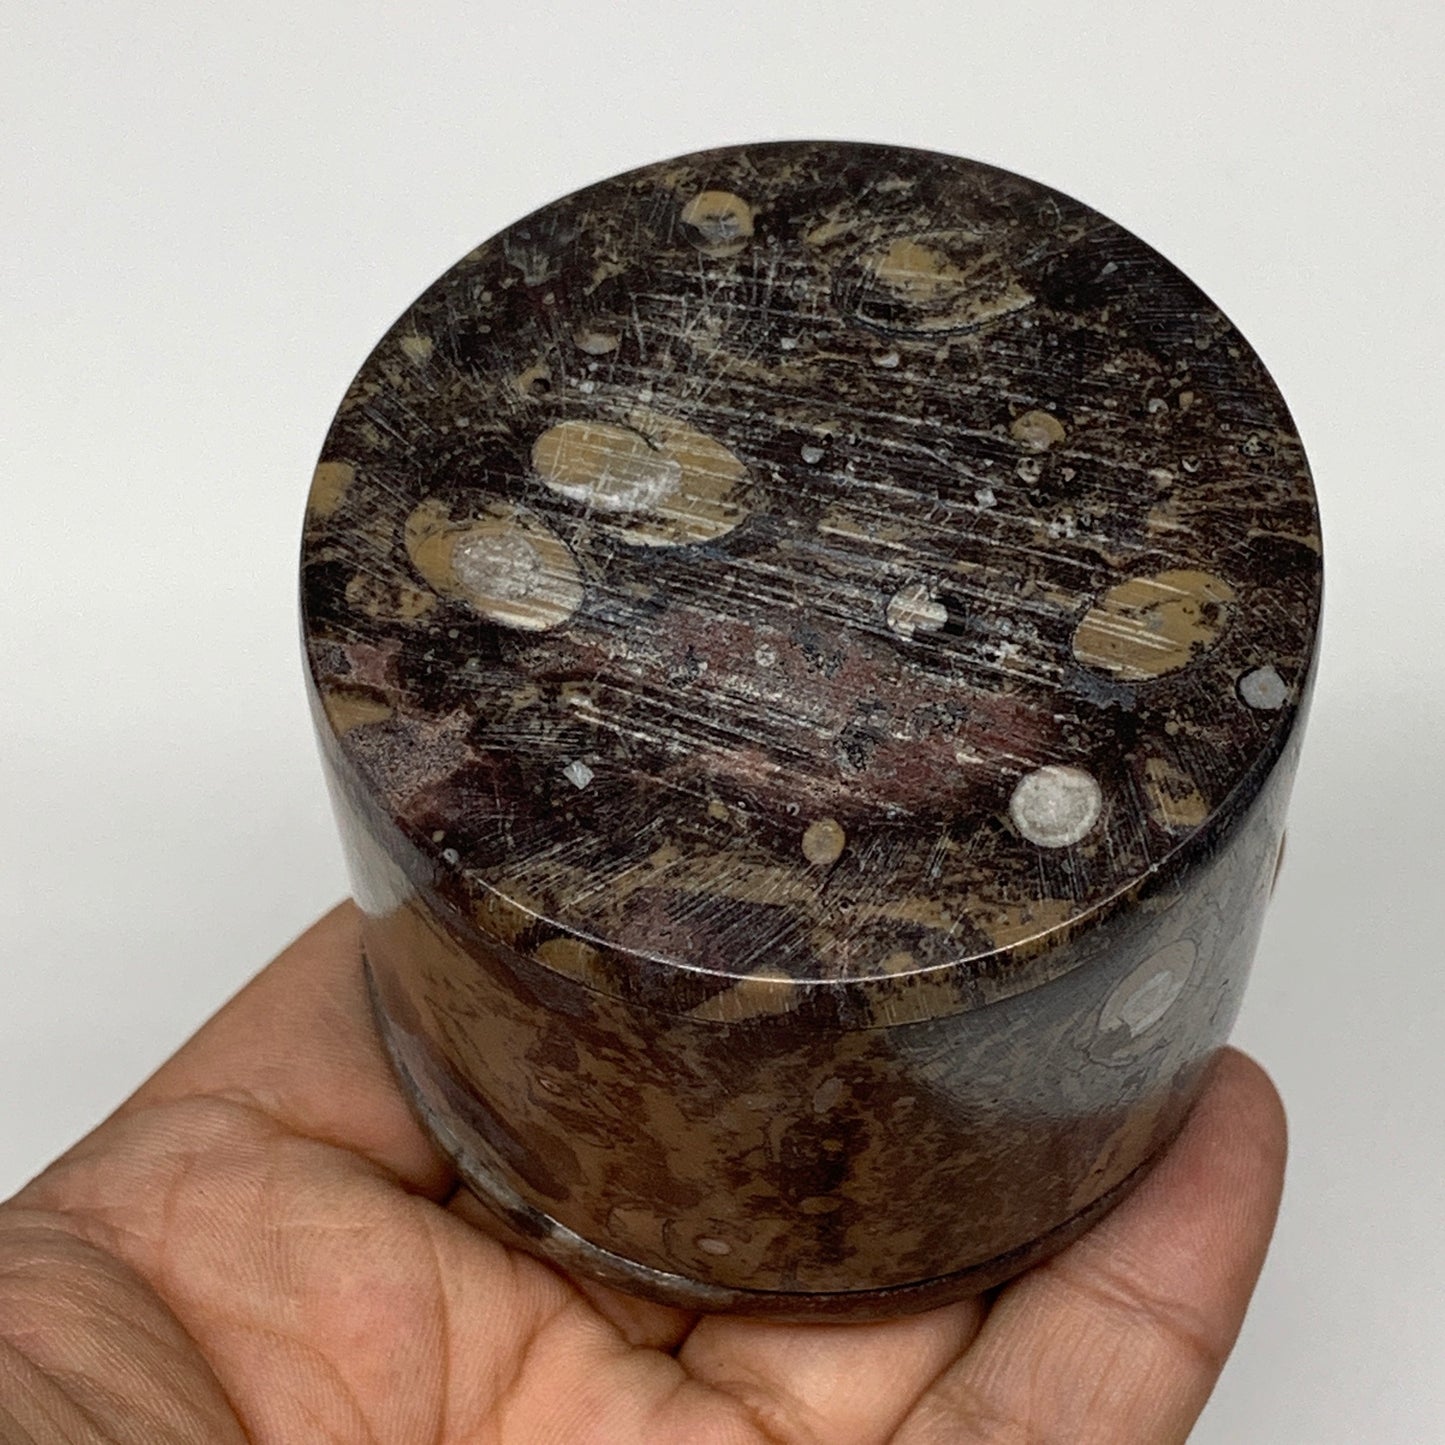 217.9g, 2.1"x2.4" Brown Fossils Ammonite Jewelry Box from Morocco, F2471